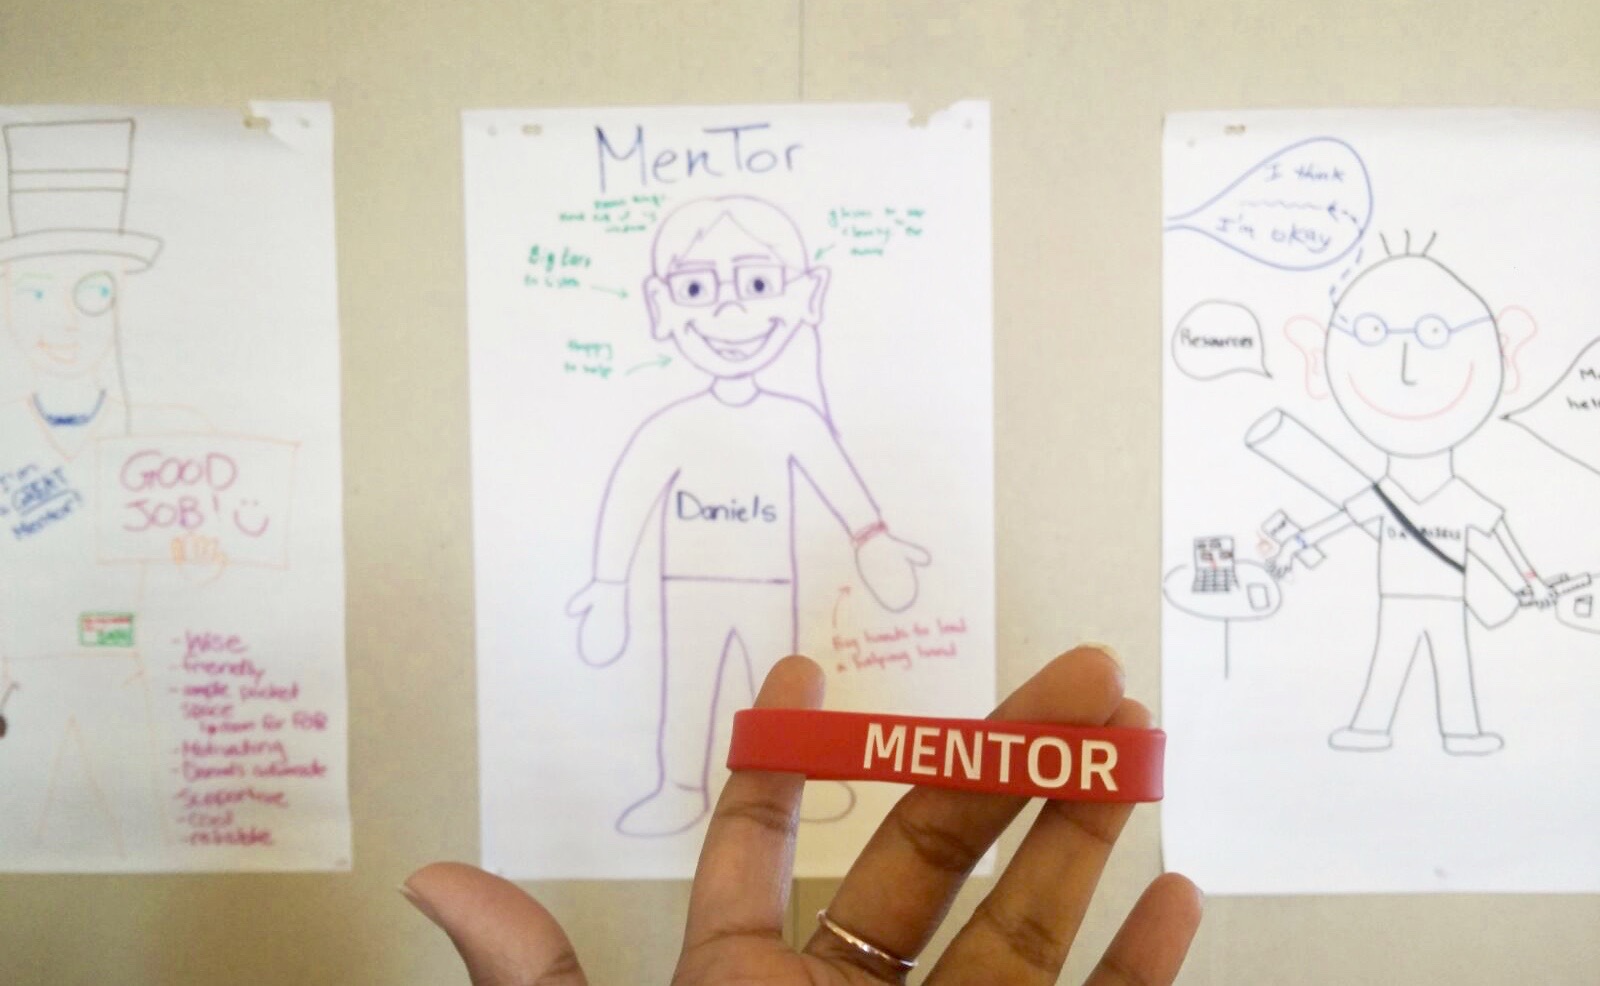 A picture of a red rubber bracelet with "Mentor" written on it.